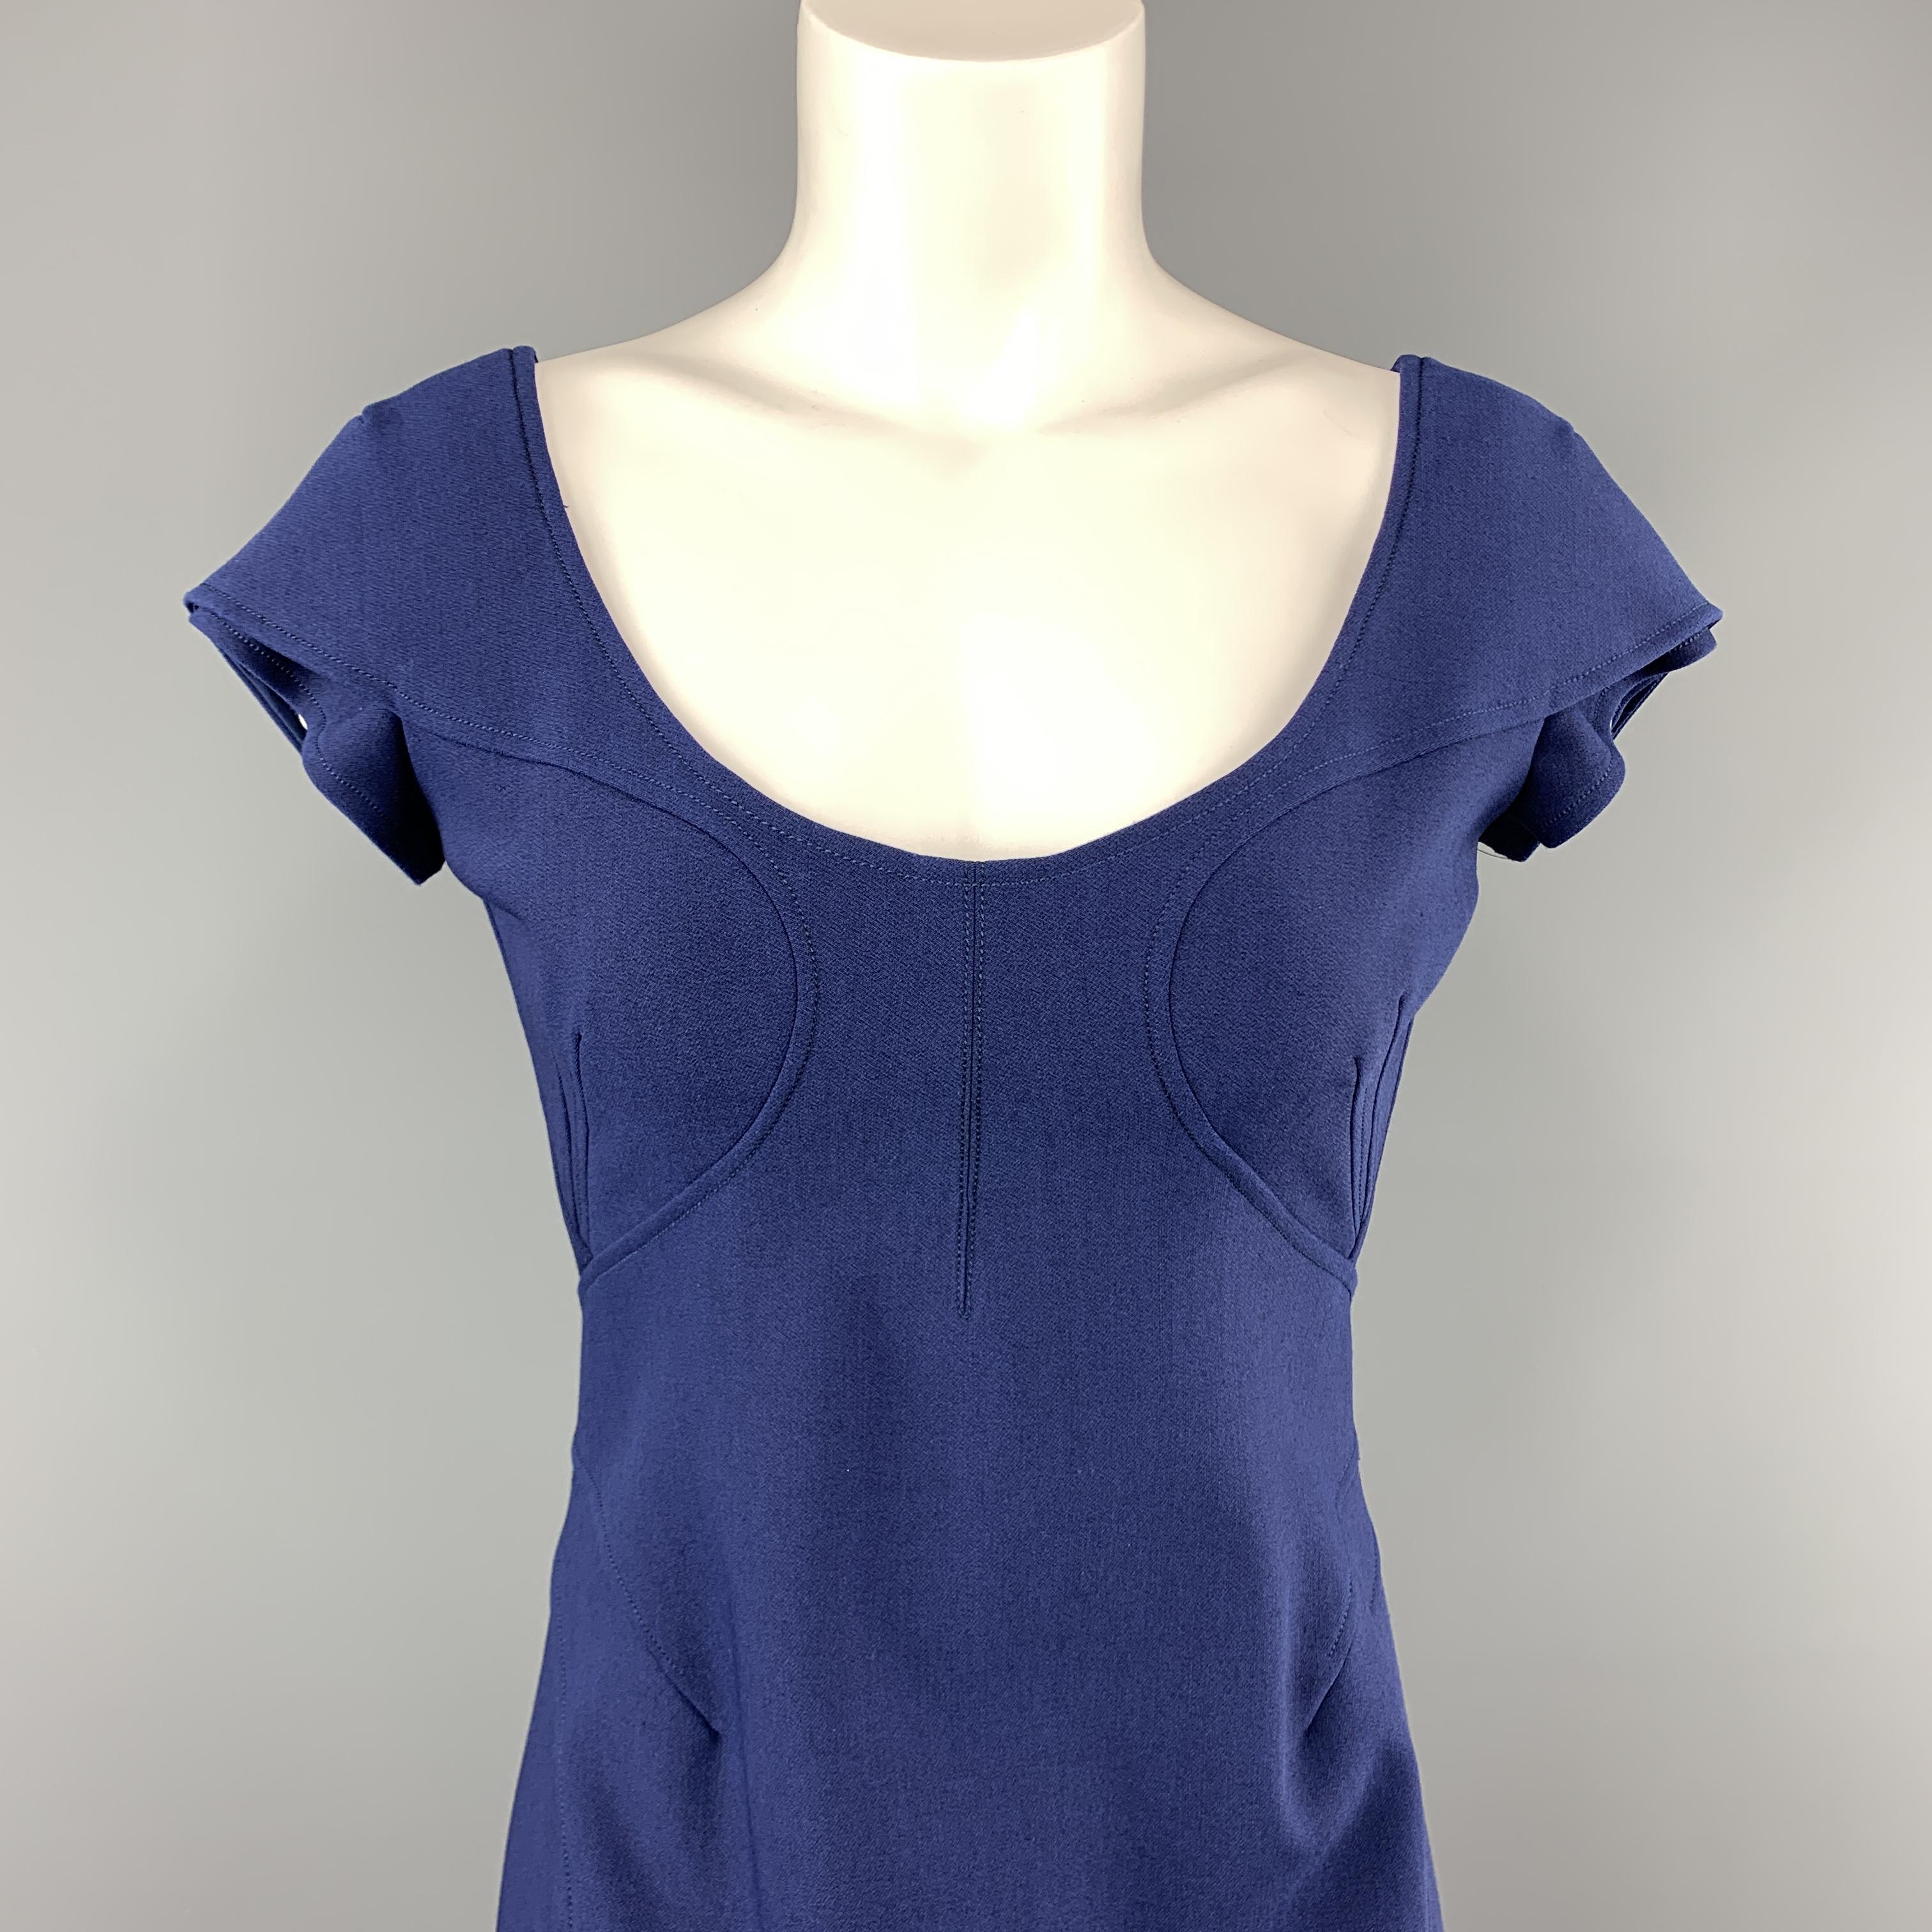 ZAC POSEN sheath dress comes in navy blue stretch wool with a scoop neck, layered cap sleeves, detailed bust, and hidden back zip.
 
Excellent Pre-Owned Condition.
Marked: 6
 
Measurements:
 
Shoulder: 15 in.
Bust: 36 in.
Waist: 28 in.
Hip: 36